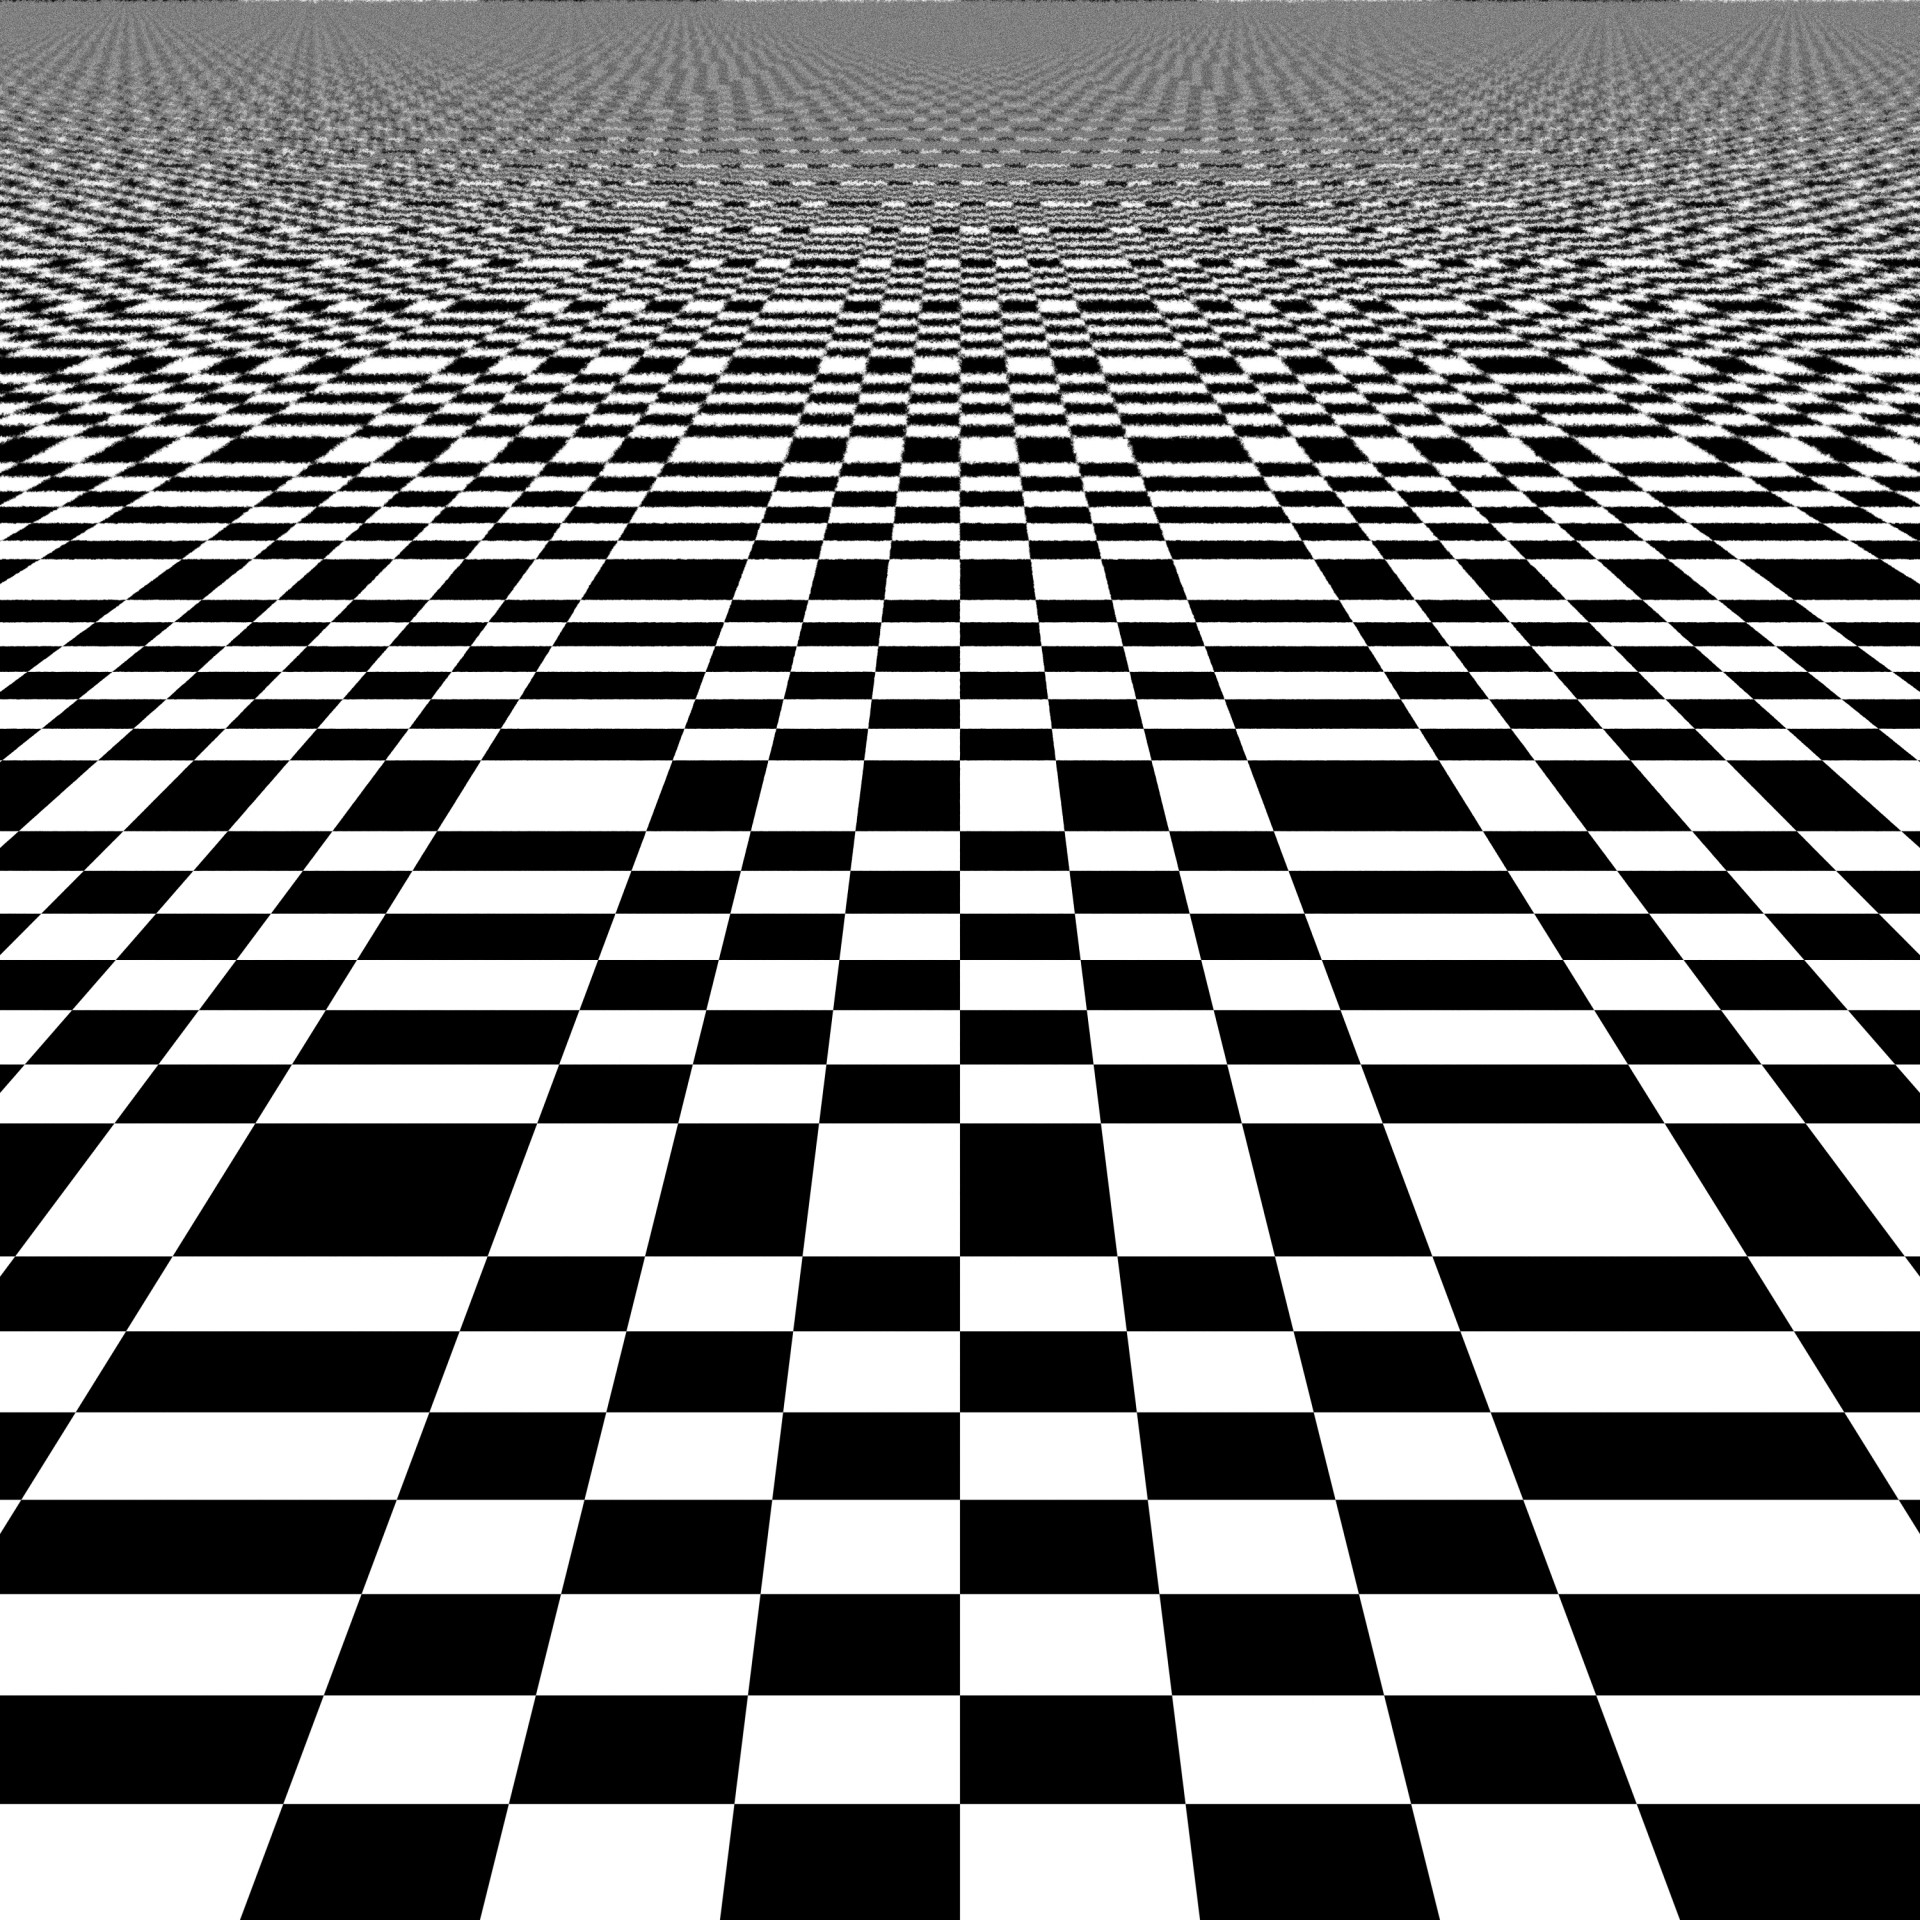 epic perspective checkered free photo